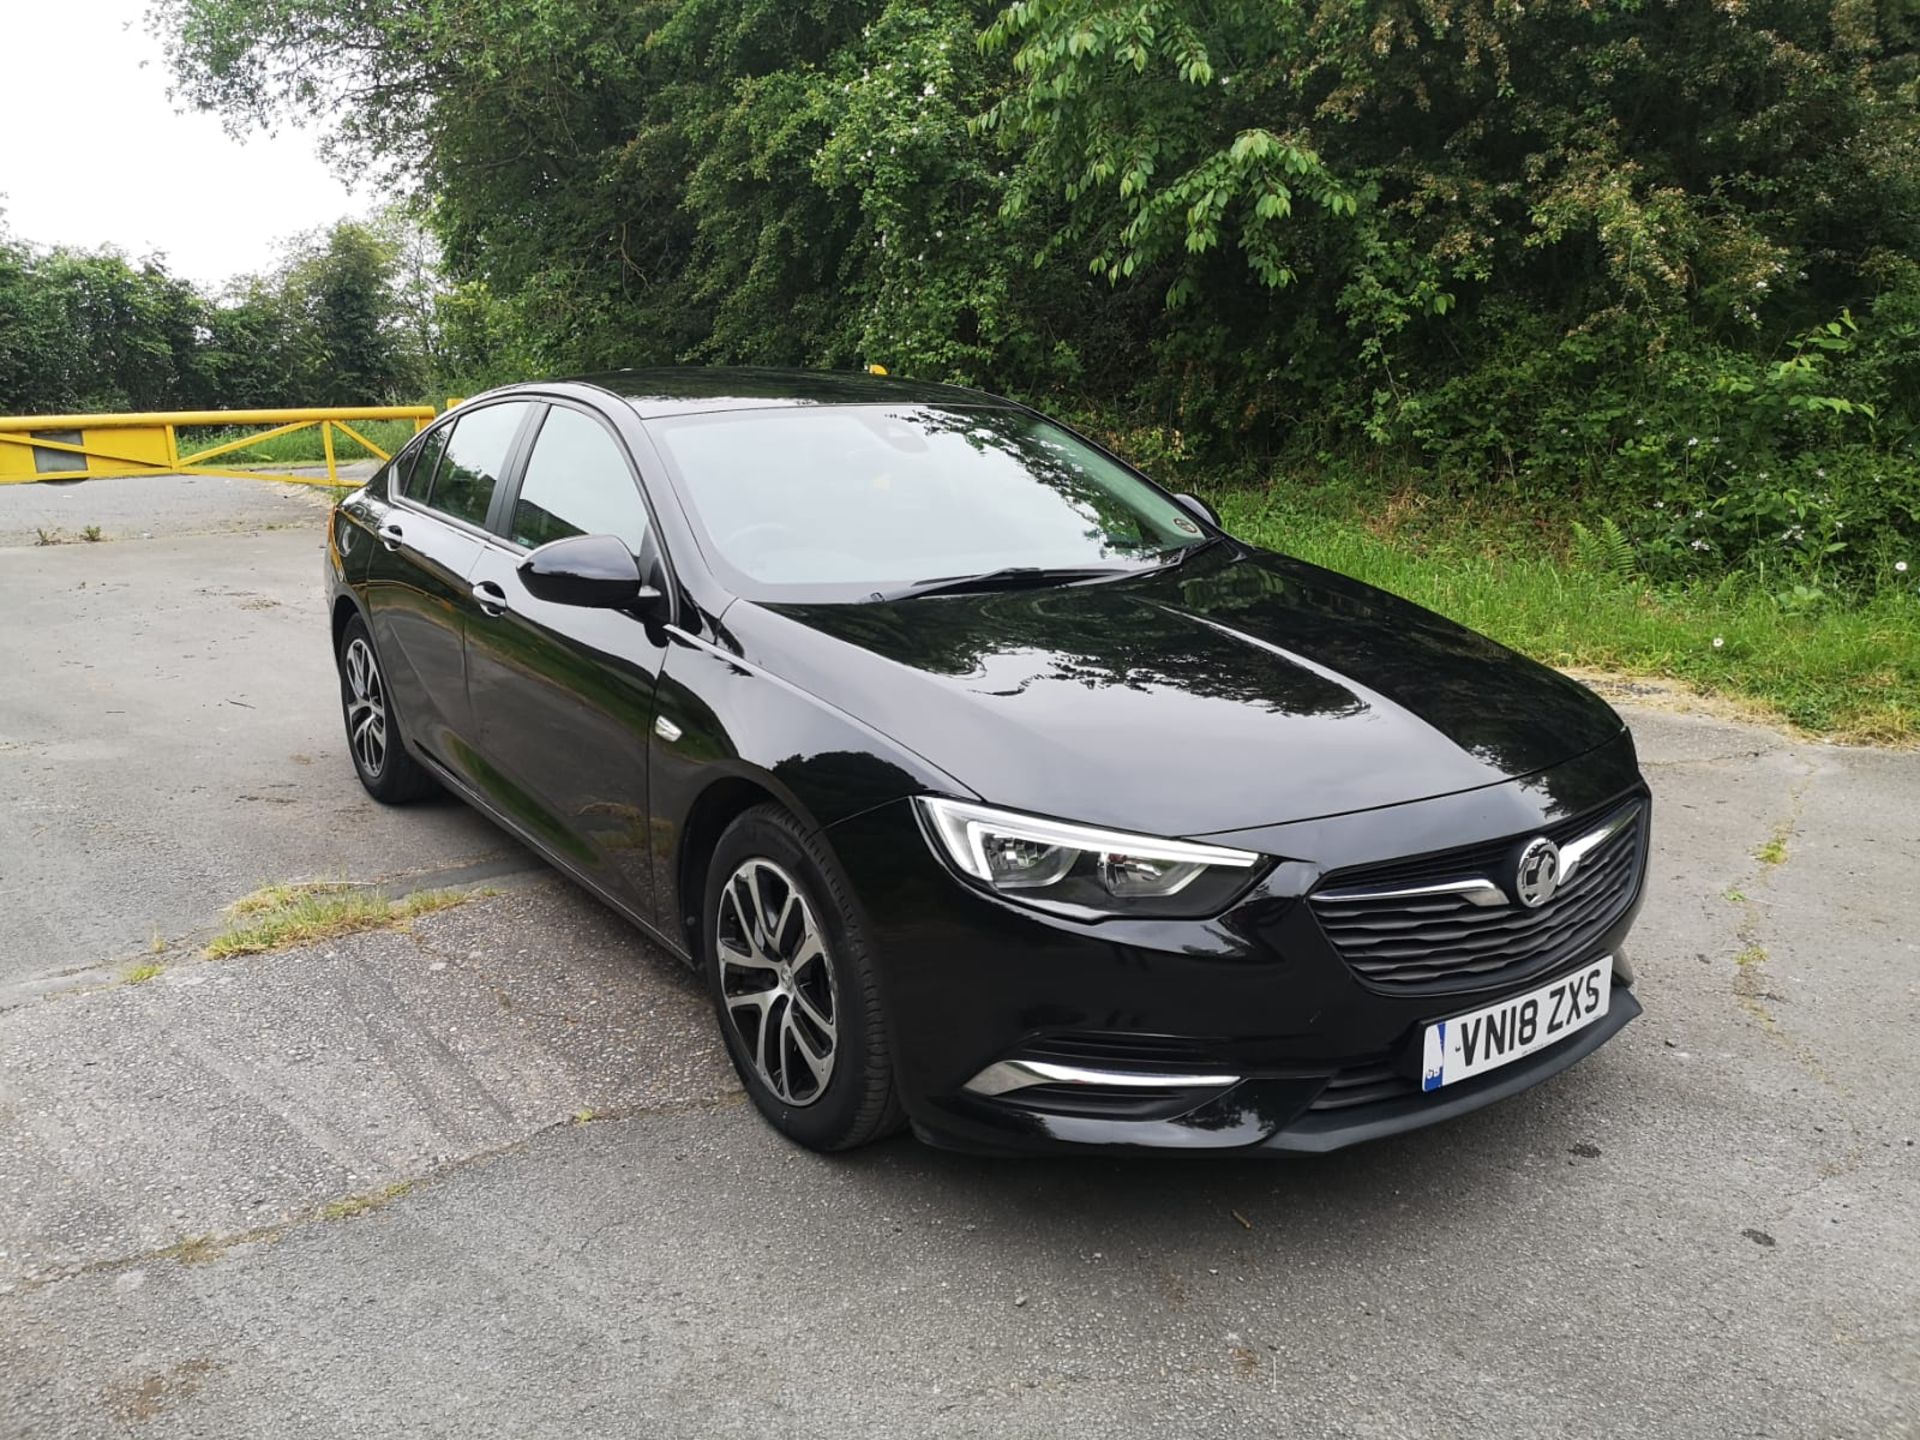 2018/18 REG VAUXHALL INSIGNIA DESIGN ECOTEC TURBO 1.6 DIESEL, SHOWING 0 FORMER KEEPERS *NO VAT* - Image 2 of 16